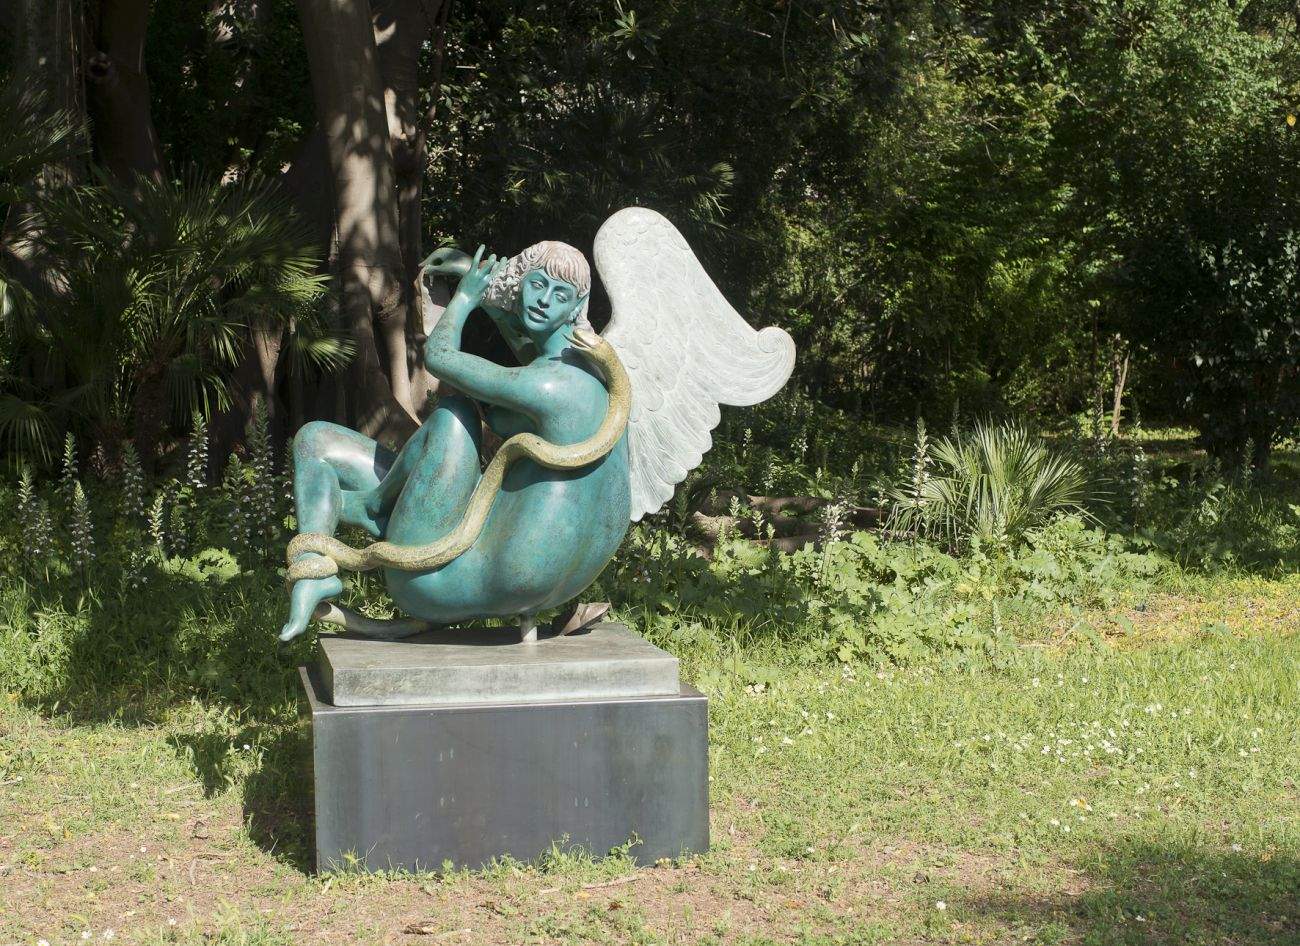 In Palermo, Alba Gonzales' sculptures in an exhibition at the Whitaker Foundation Park